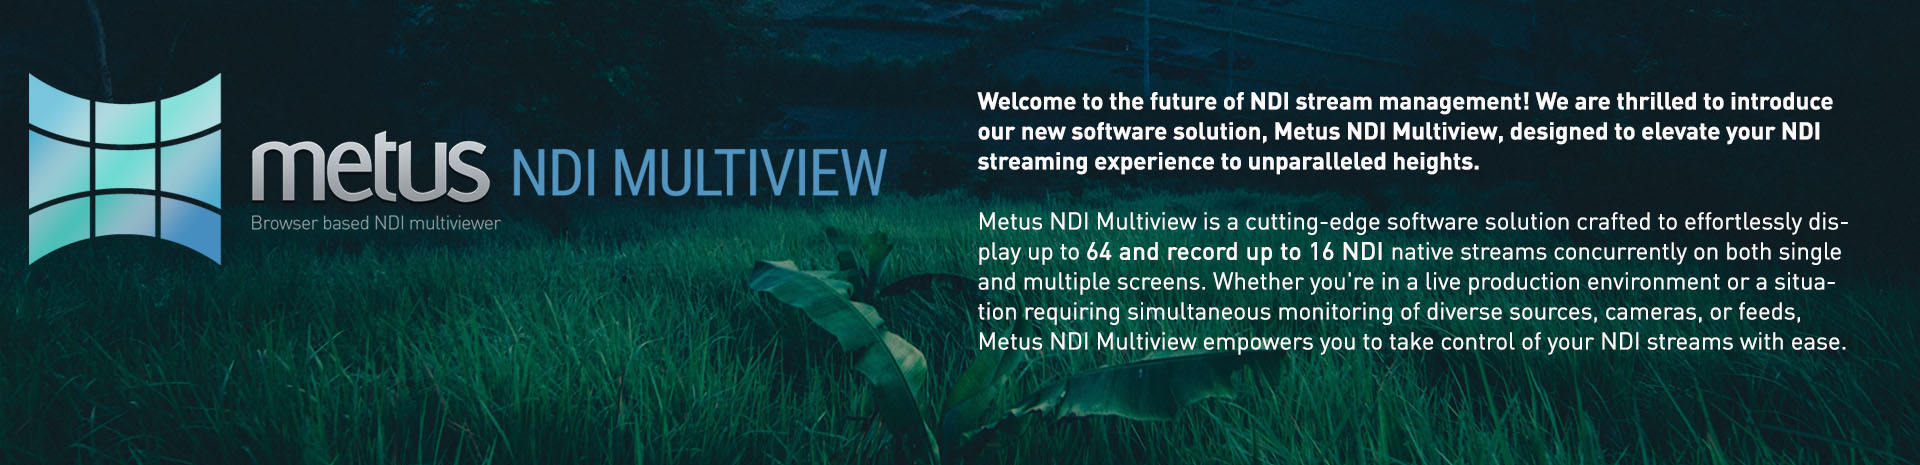 Discover the power of Metus NDI Multiview today!